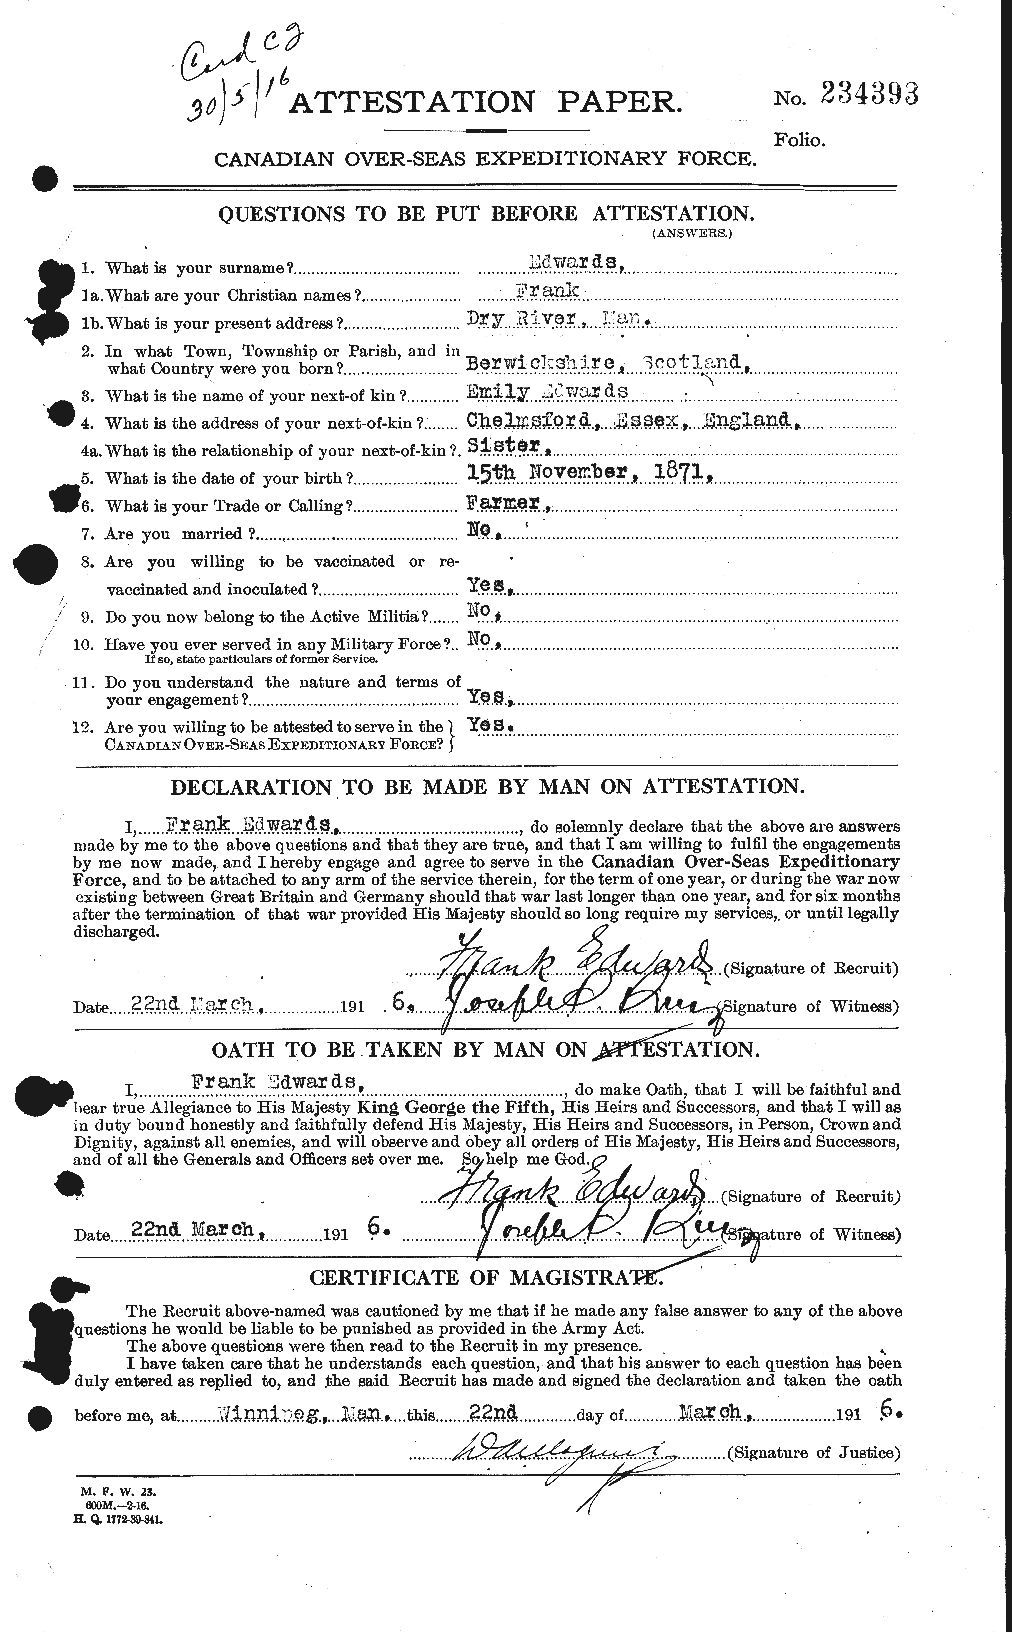 Personnel Records of the First World War - CEF 309045a